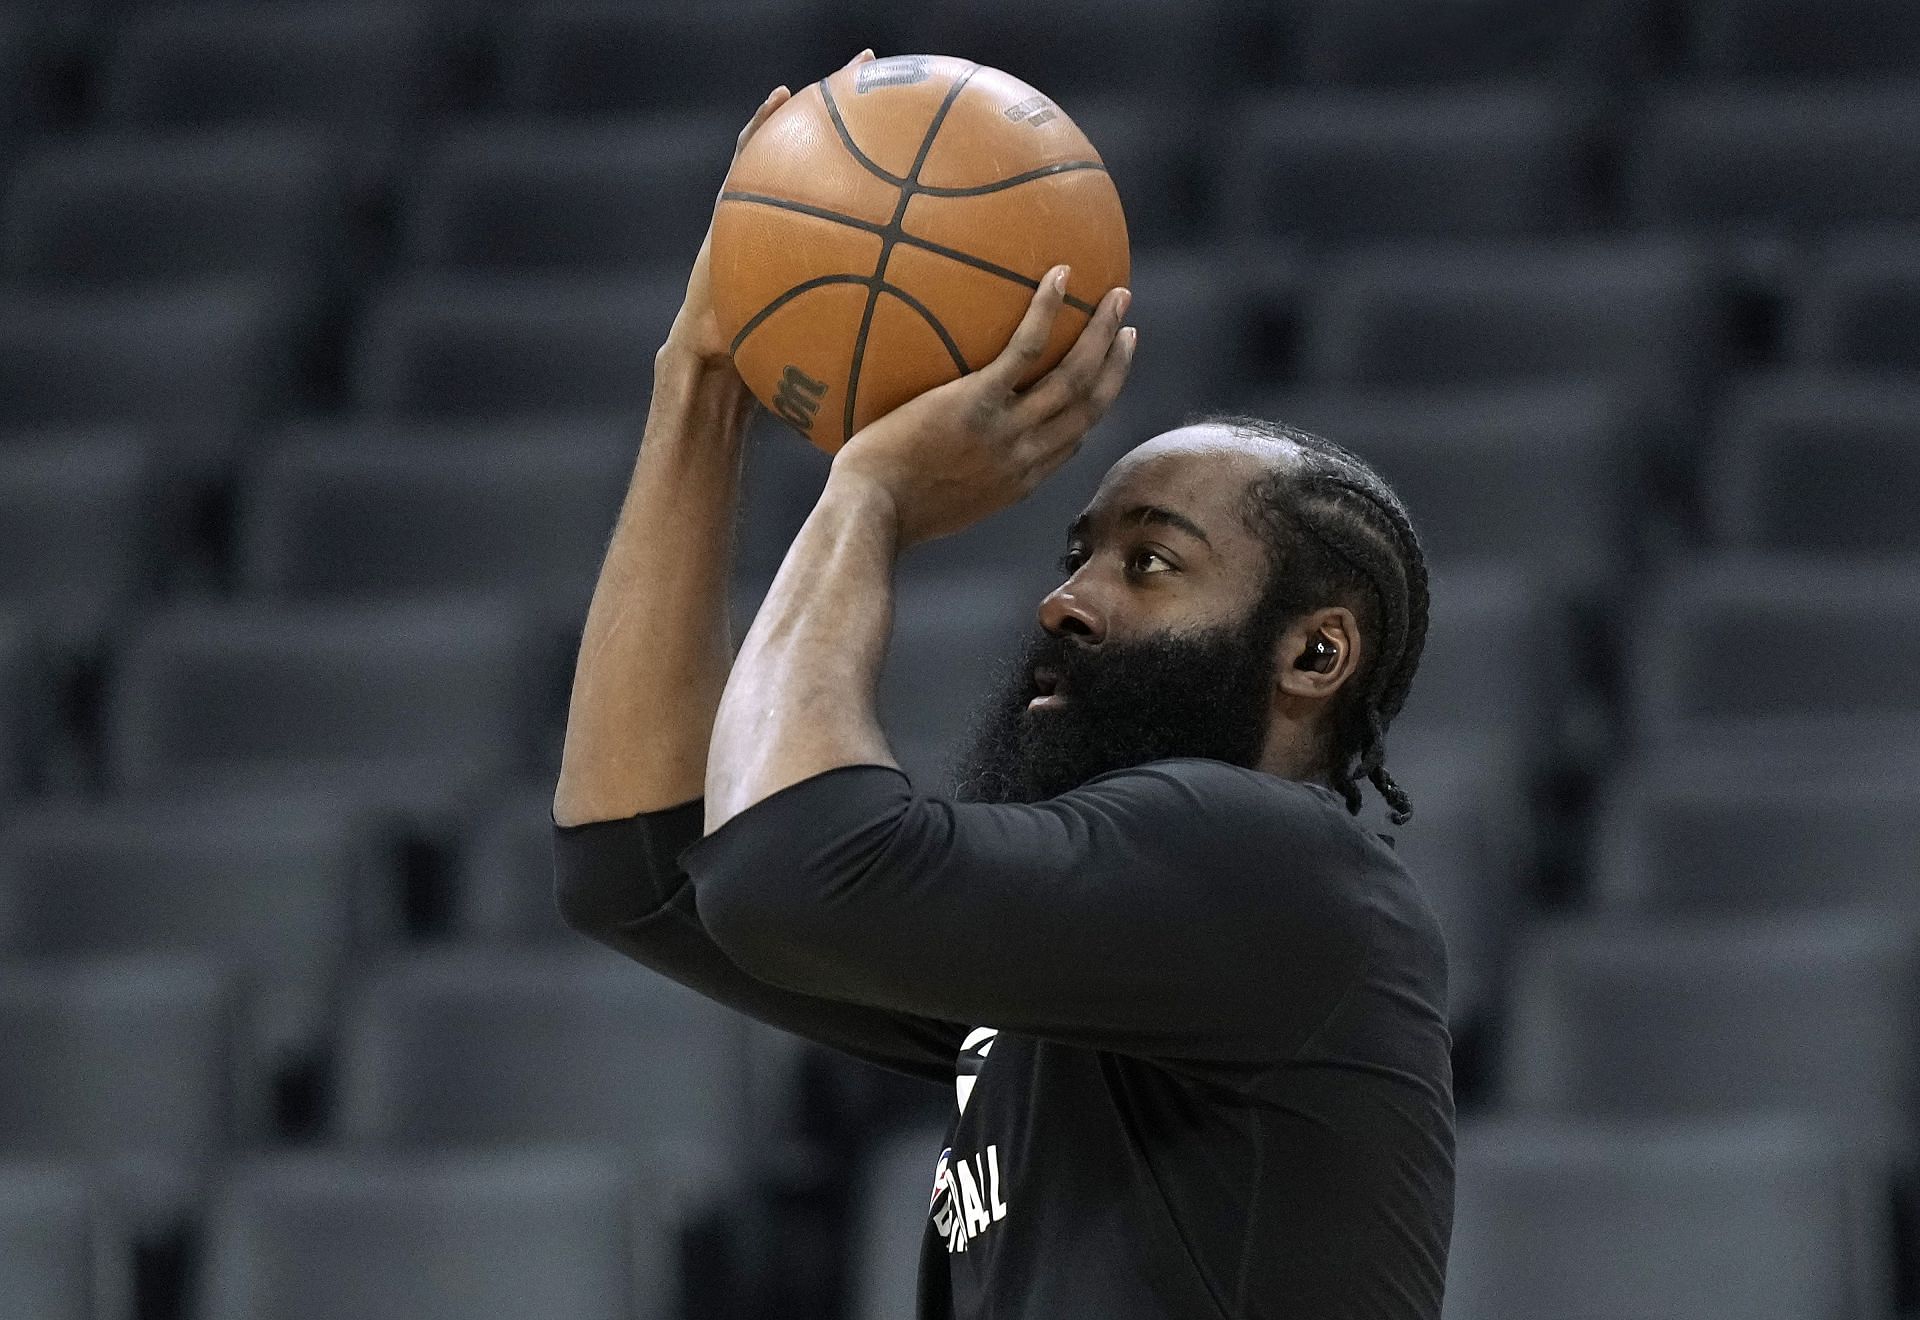 James Harden #13 of the Brooklyn Nets on the court warming up prior to the start of his game against the Sacramento Kings at Golden 1 Center on February 02, 2022 in Sacramento, California.